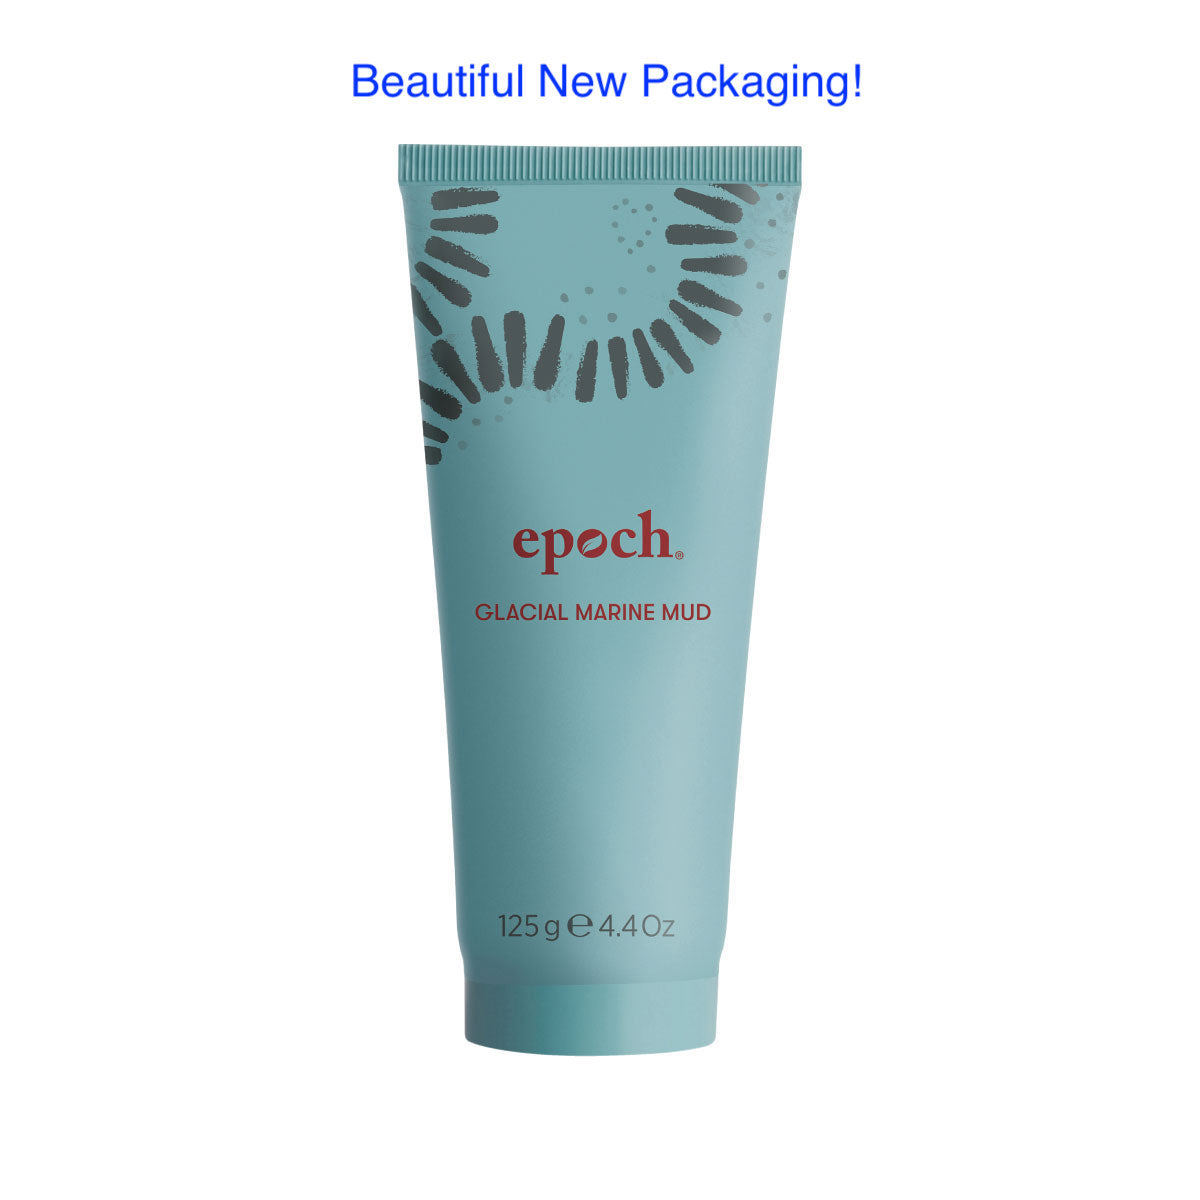 EPOCH® Glacial Marine Mud (discovered by Pacific West indigenous people for its skin benefits, sourced from Canada, free shipping)